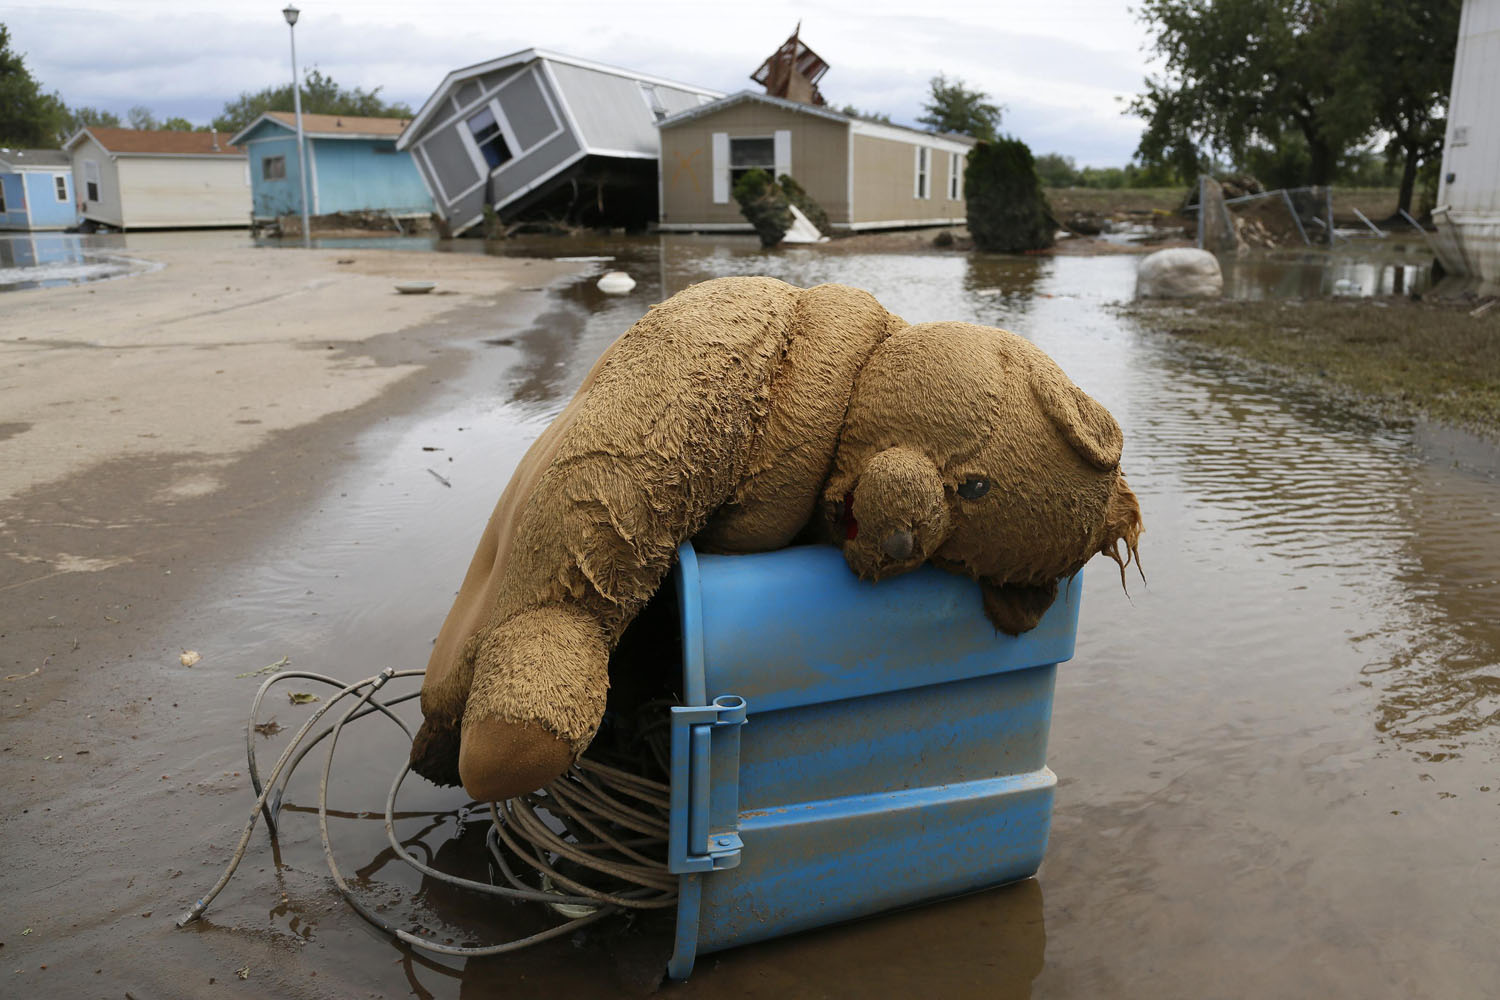 A stuffed teddy bear chair lies slumped over in the flooded Eastwood Village in Evans, Colorado